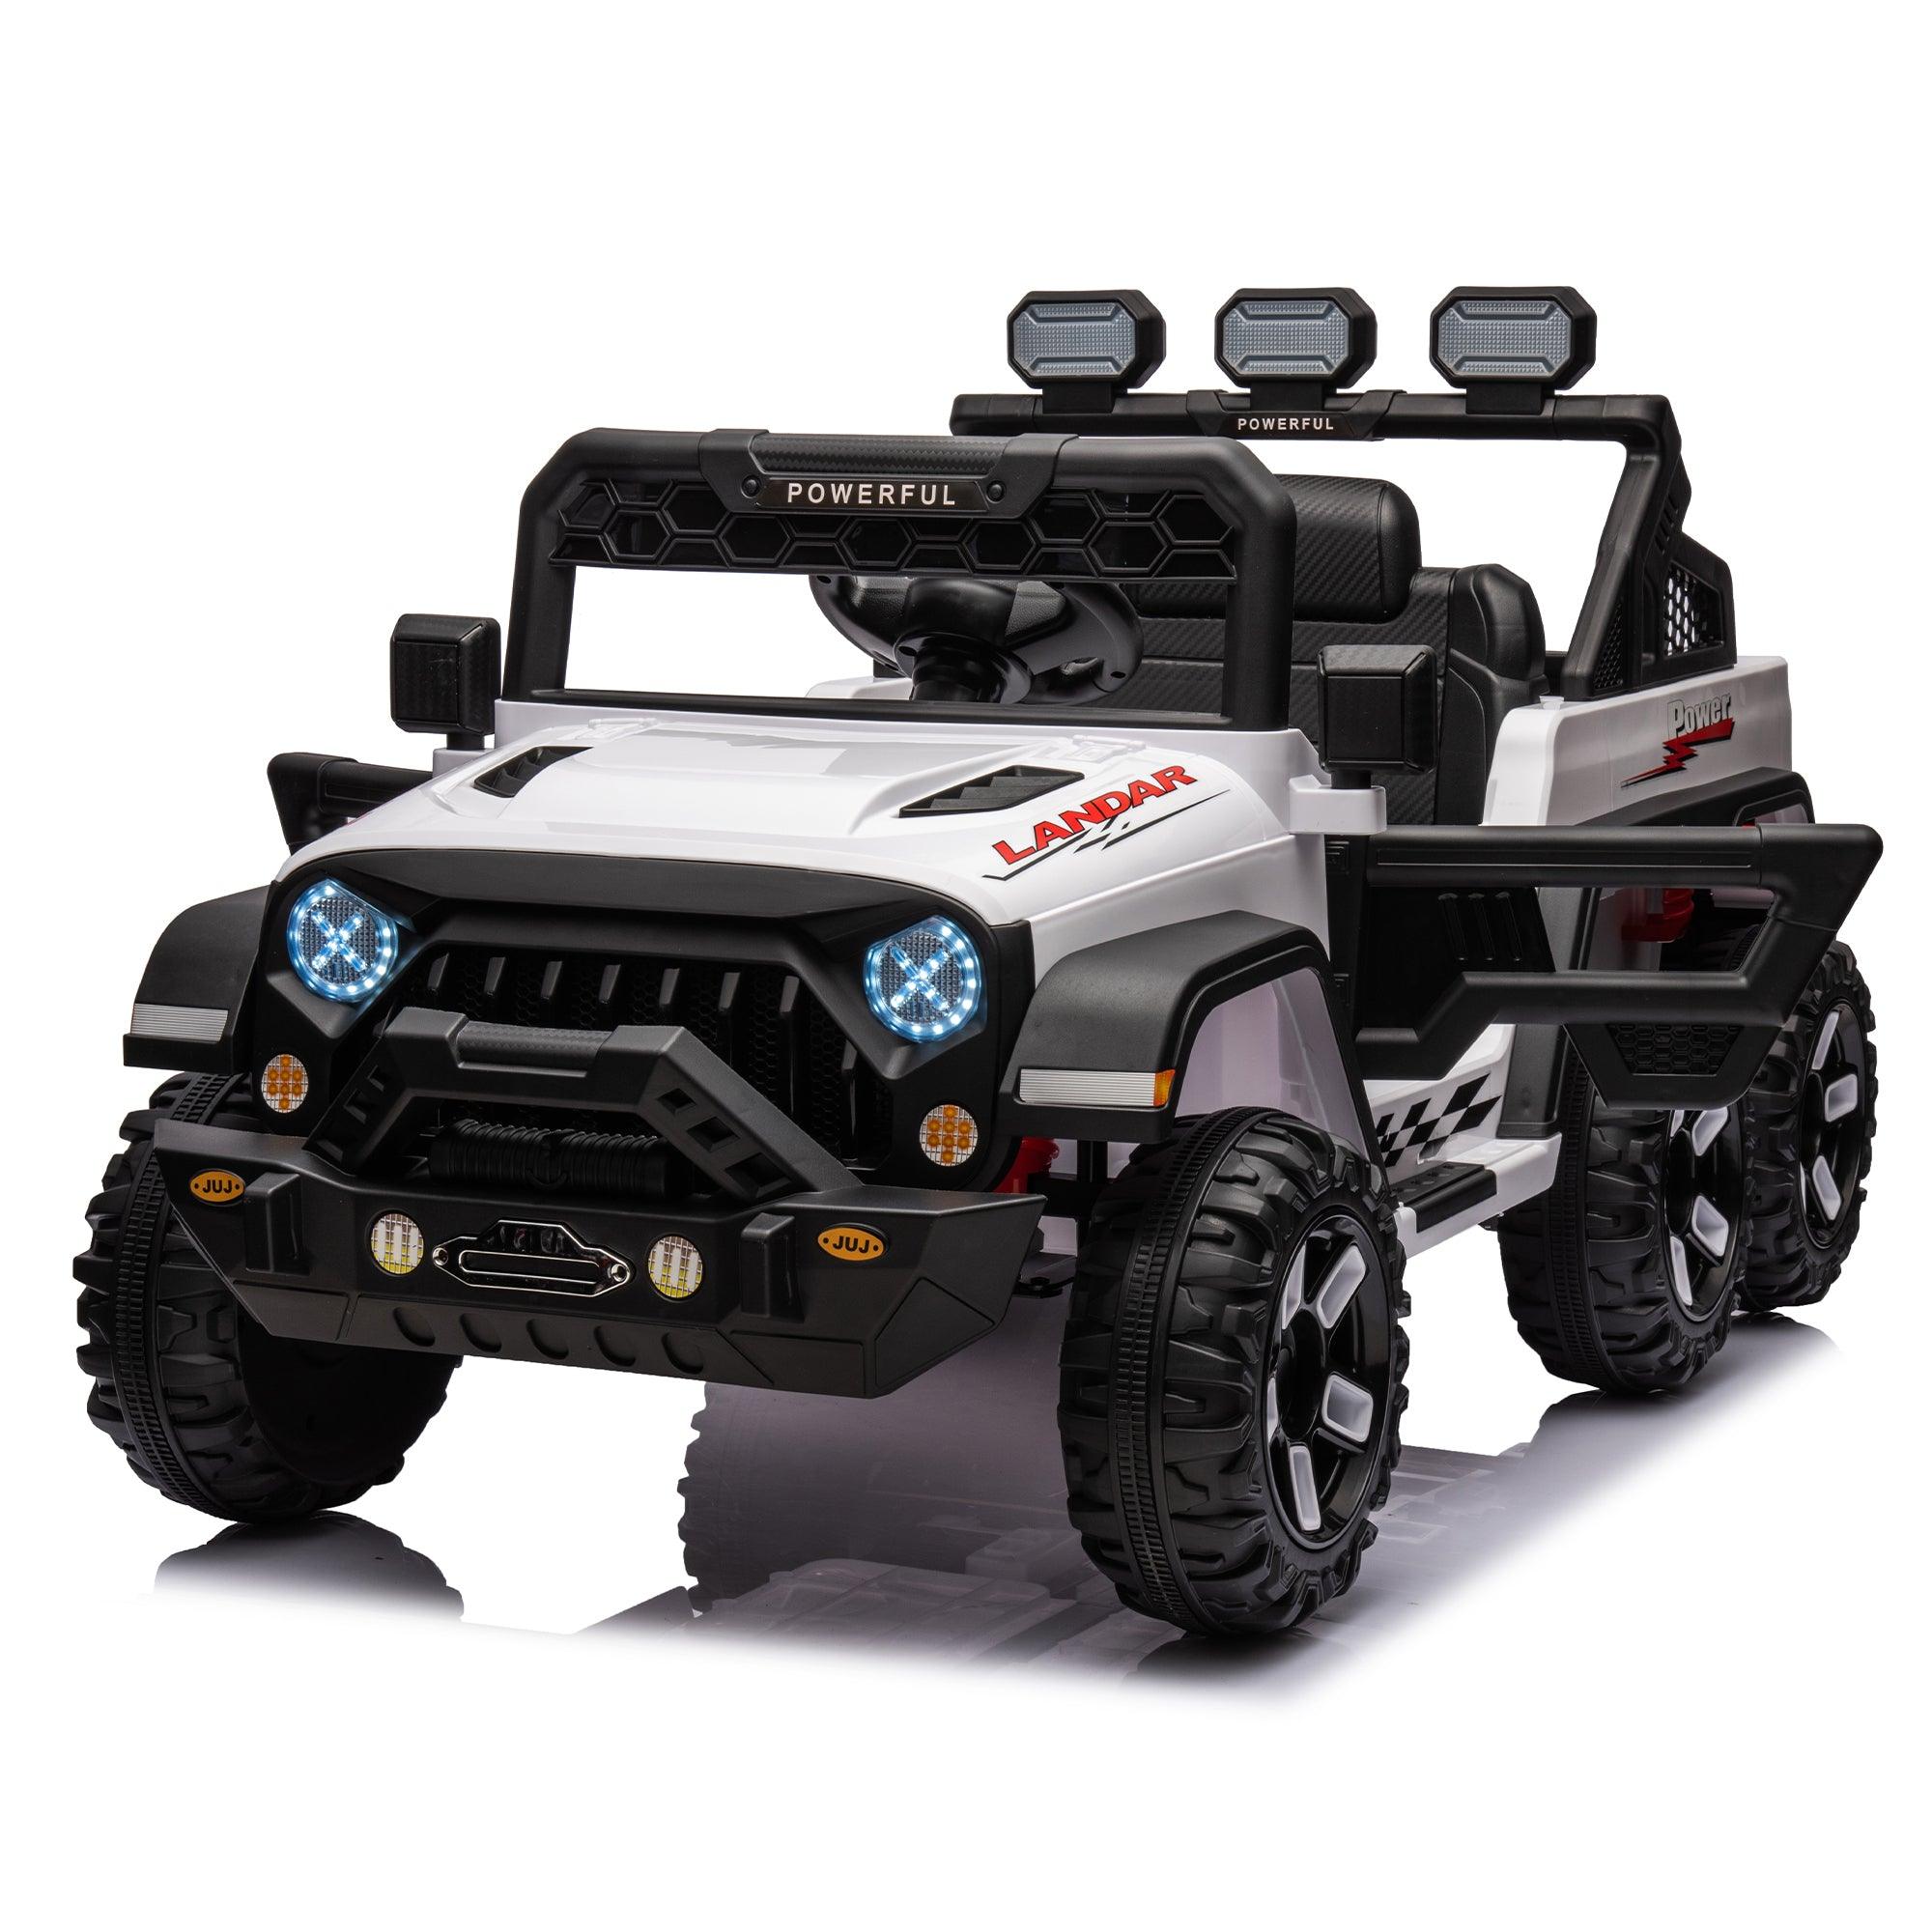 🆓🚛 24V Ride On Large Ride On Pickup Truck Car for Kids, With Remote Control, Parents Can Assist In Driving, Bluetooth Music Version, Spacious Storage In The Rear, Black & White